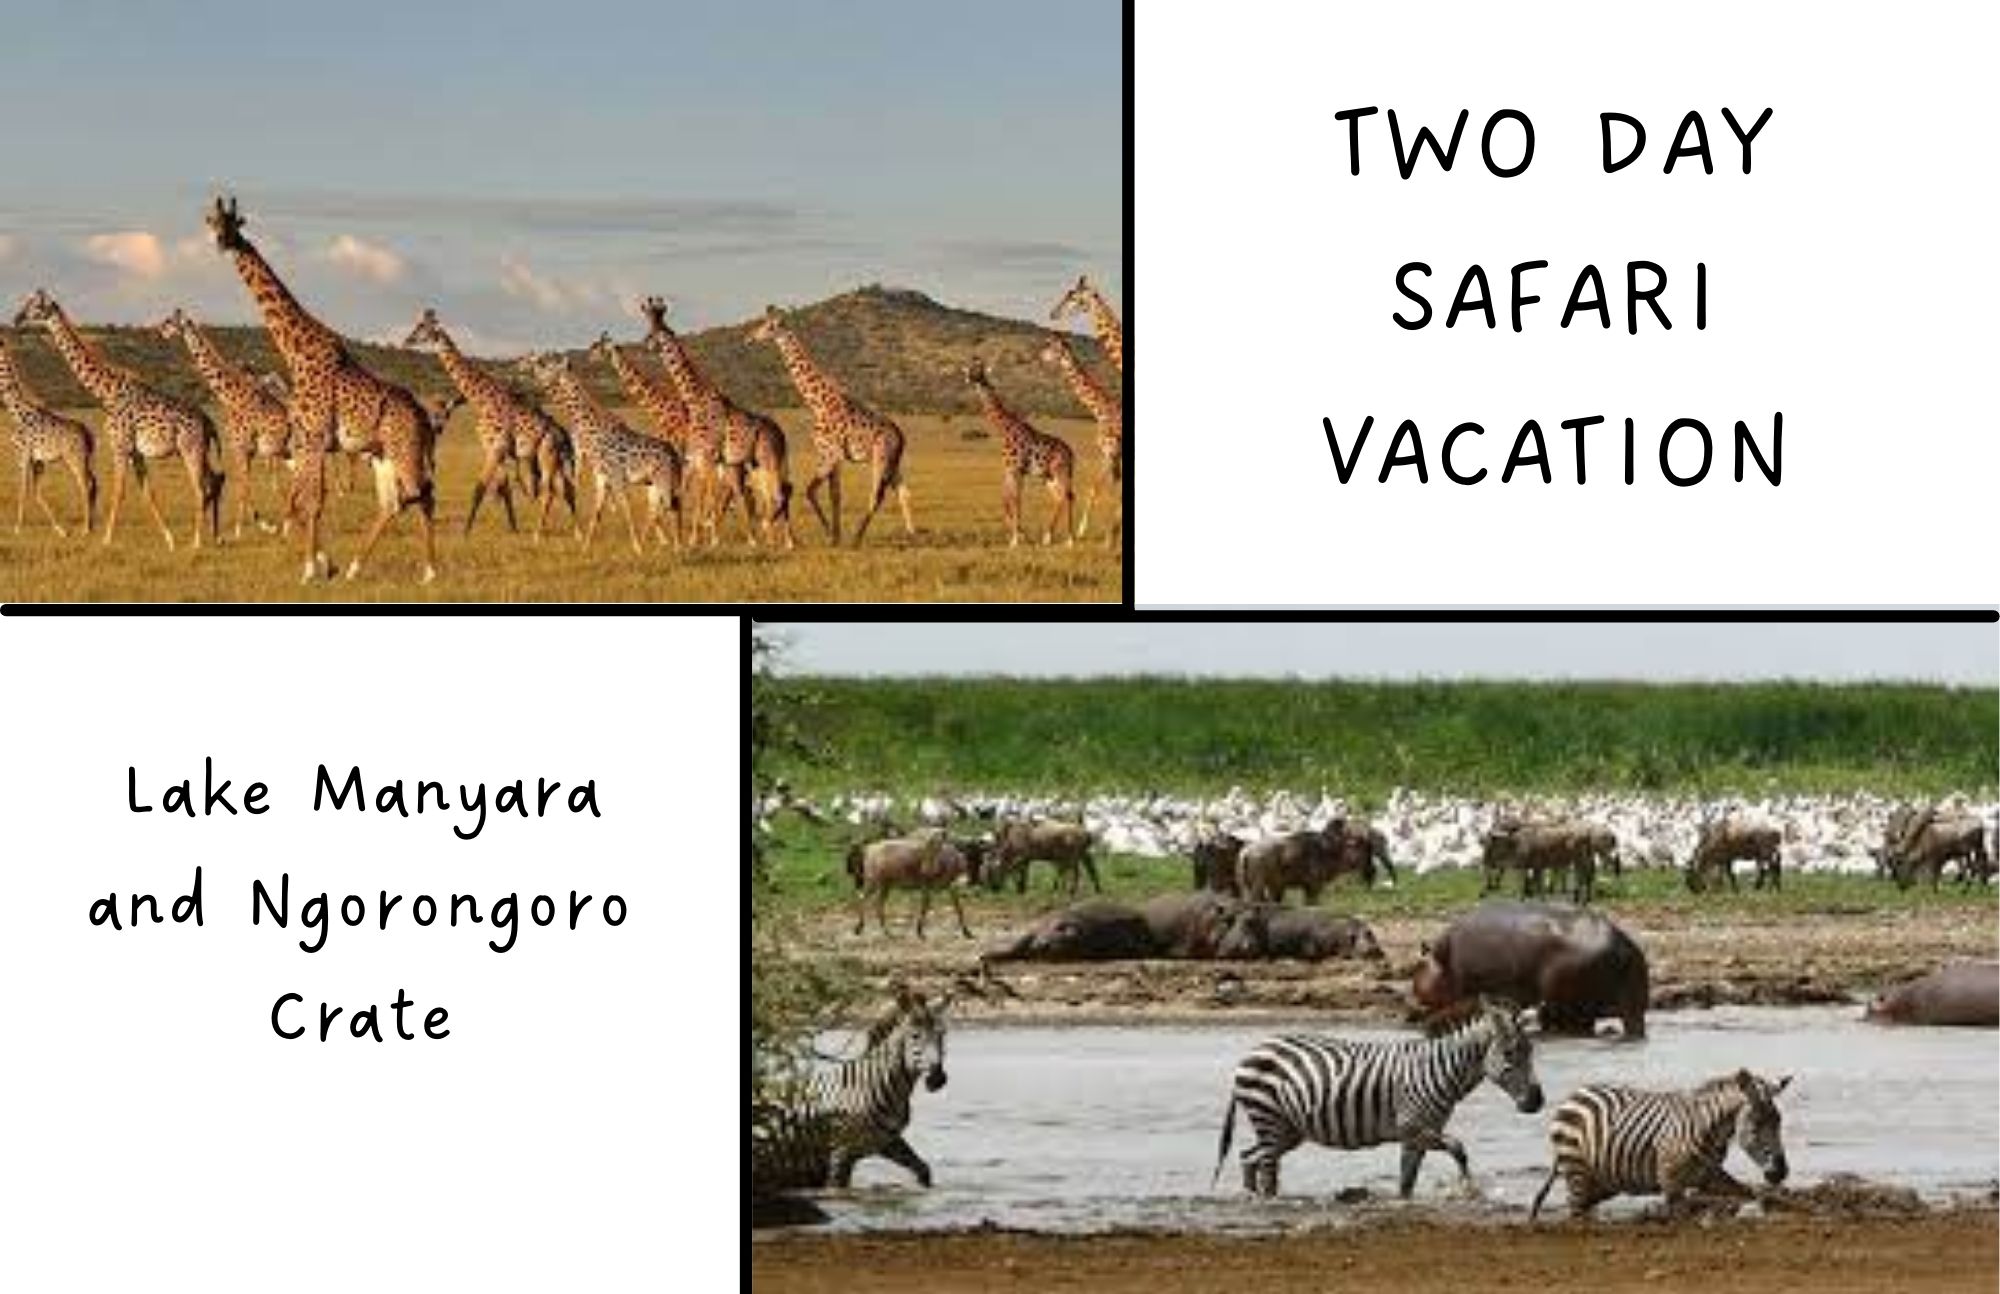 Lake Manyara with 12 Girrafes walking in the upper left corner, and the Ngorongoro Crater with zebras, hippopotamuses, and wildebeest walking in the lower right corner